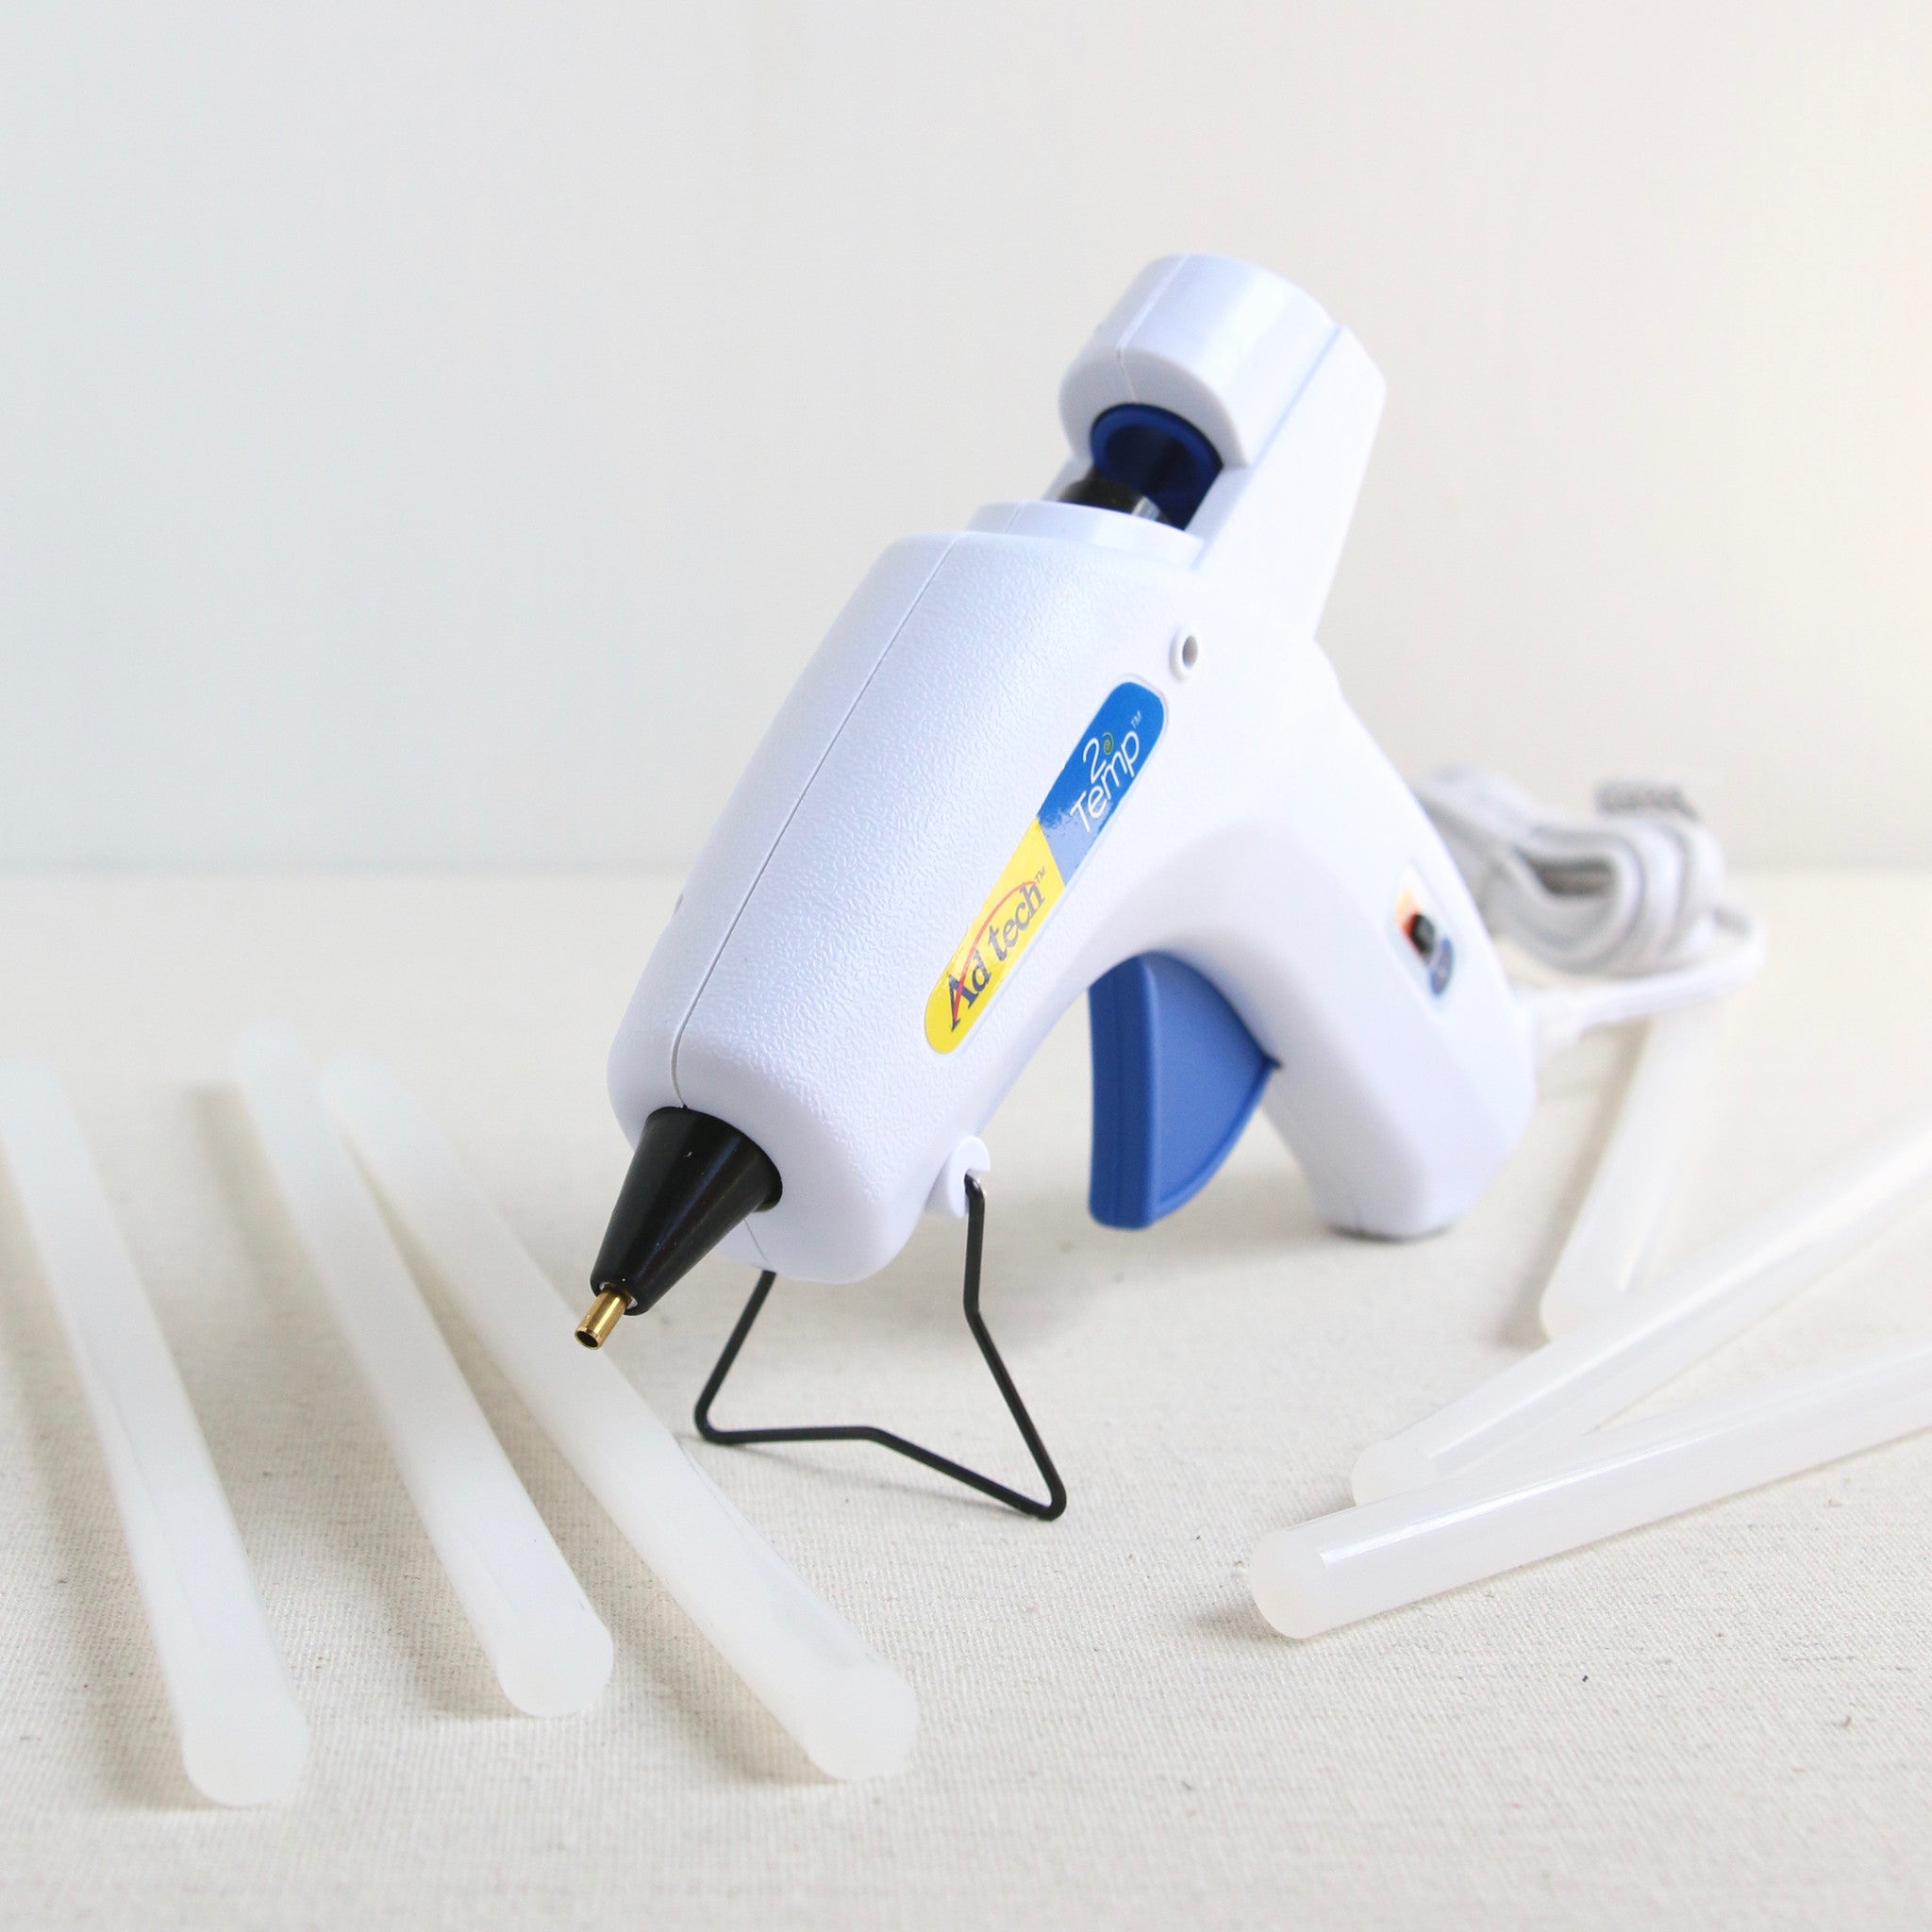 How to use Hot Glue Gun - Everything you need to know about using hot